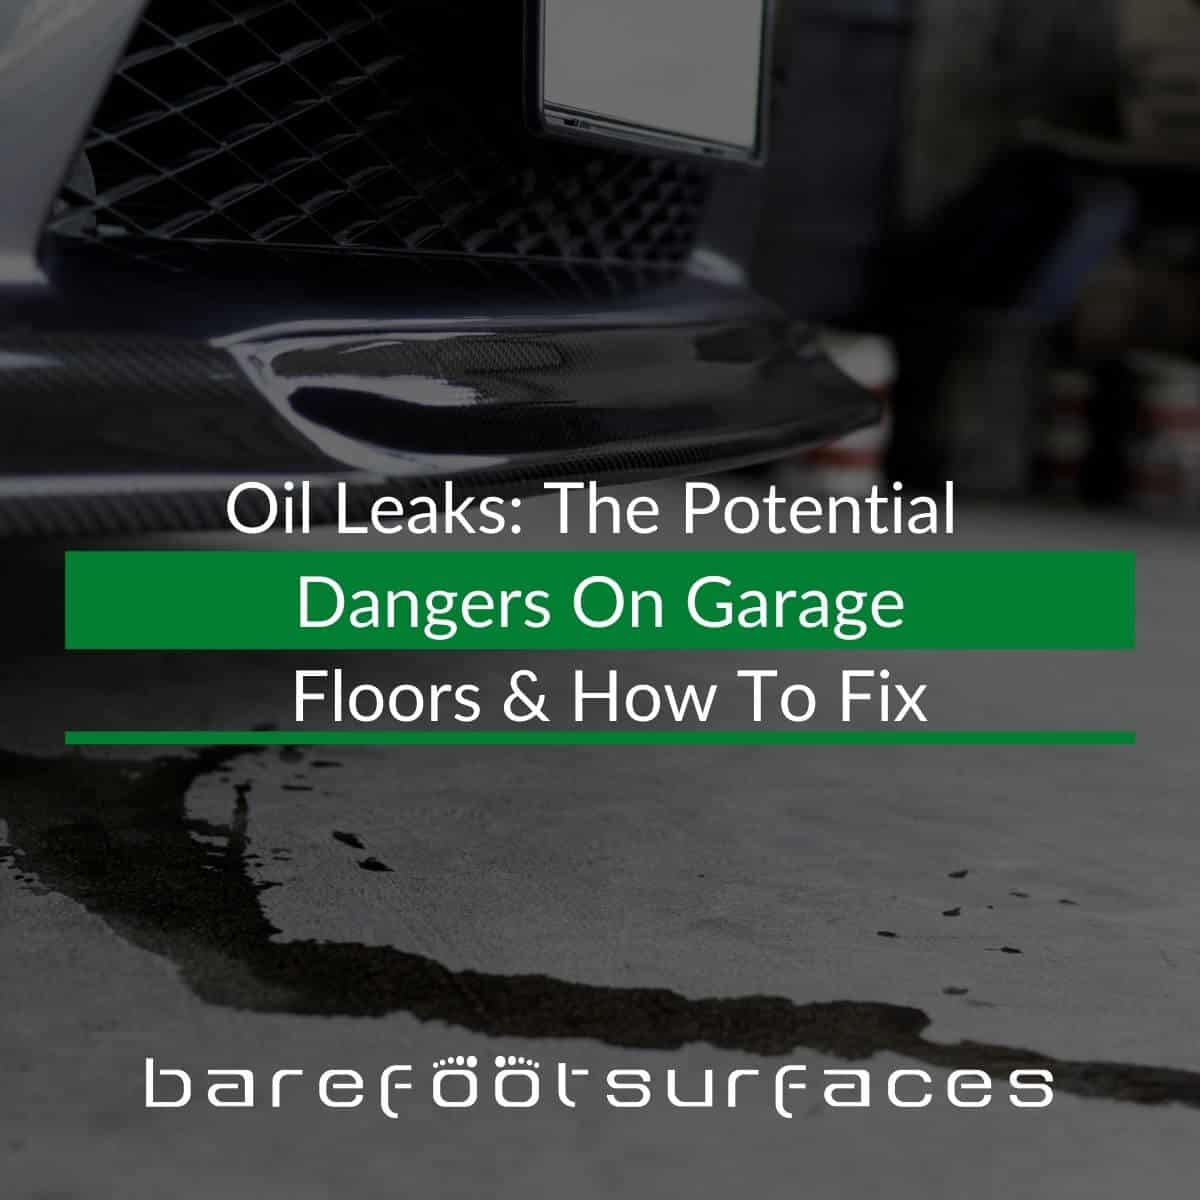 Oil Leaks: The Potential Dangers On Garage Floors & How To Fix